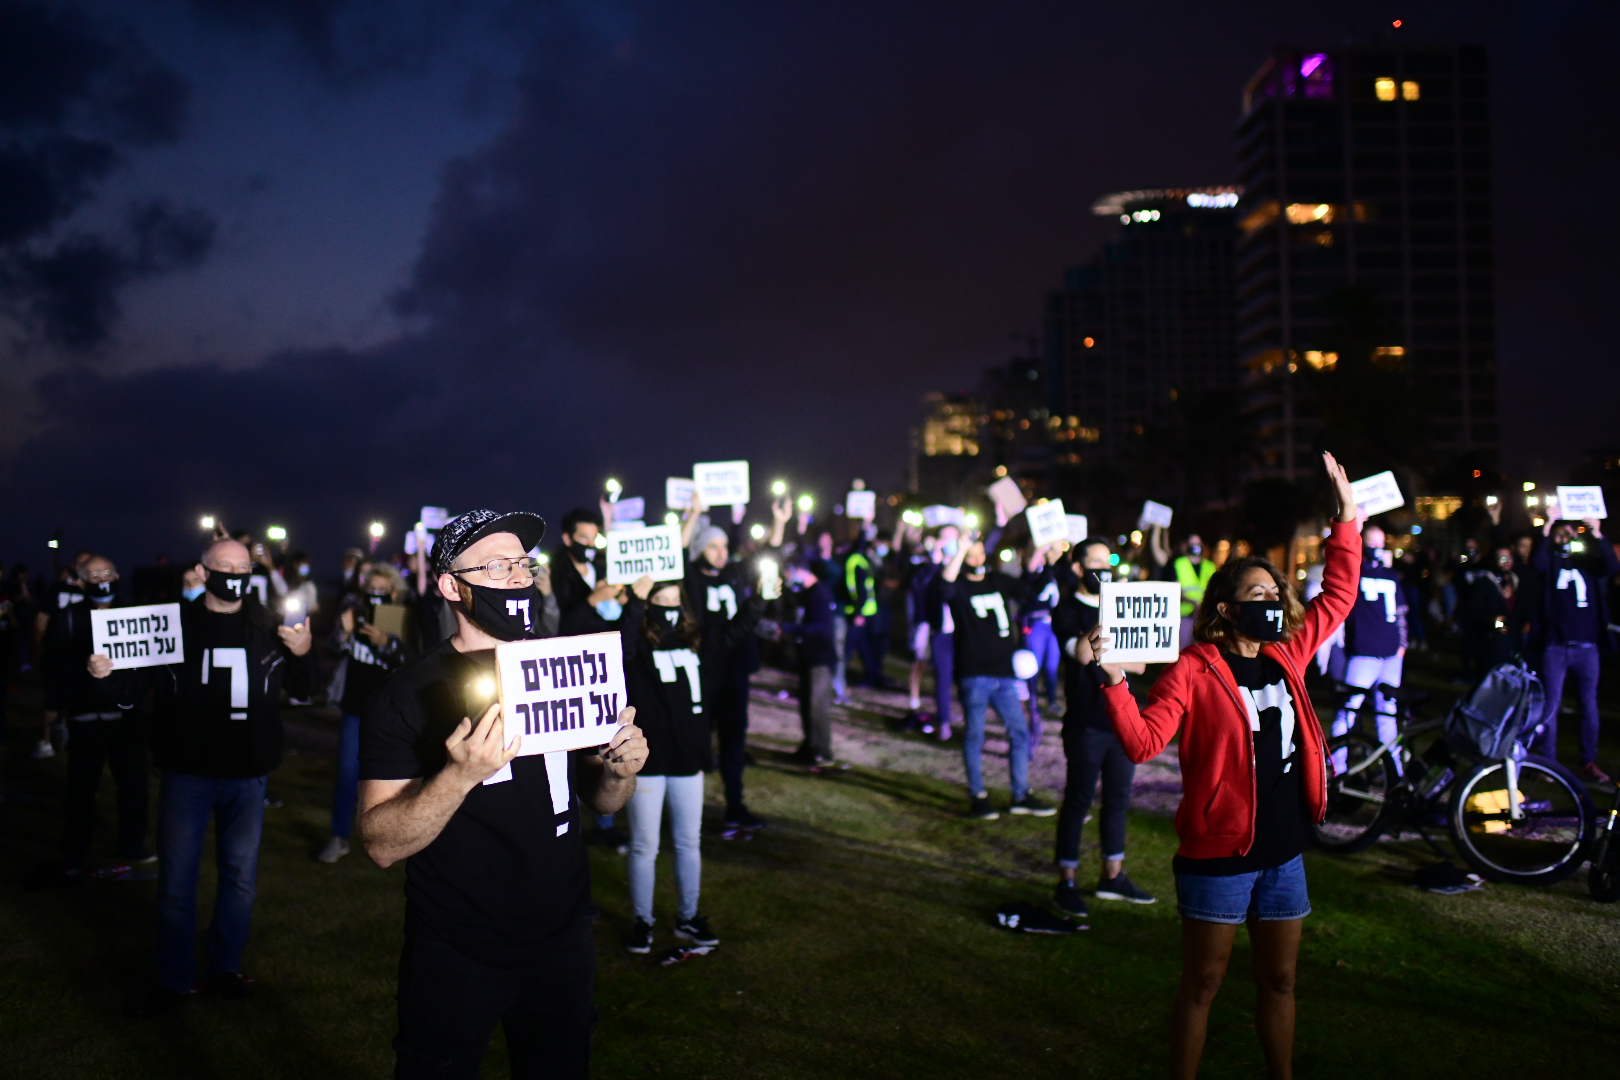 Small business owners and activists participate in a rally calling for financial support from the Israeli government in Tel Aviv, May 9, 2020 (Tomer Neuberg/Flash90)